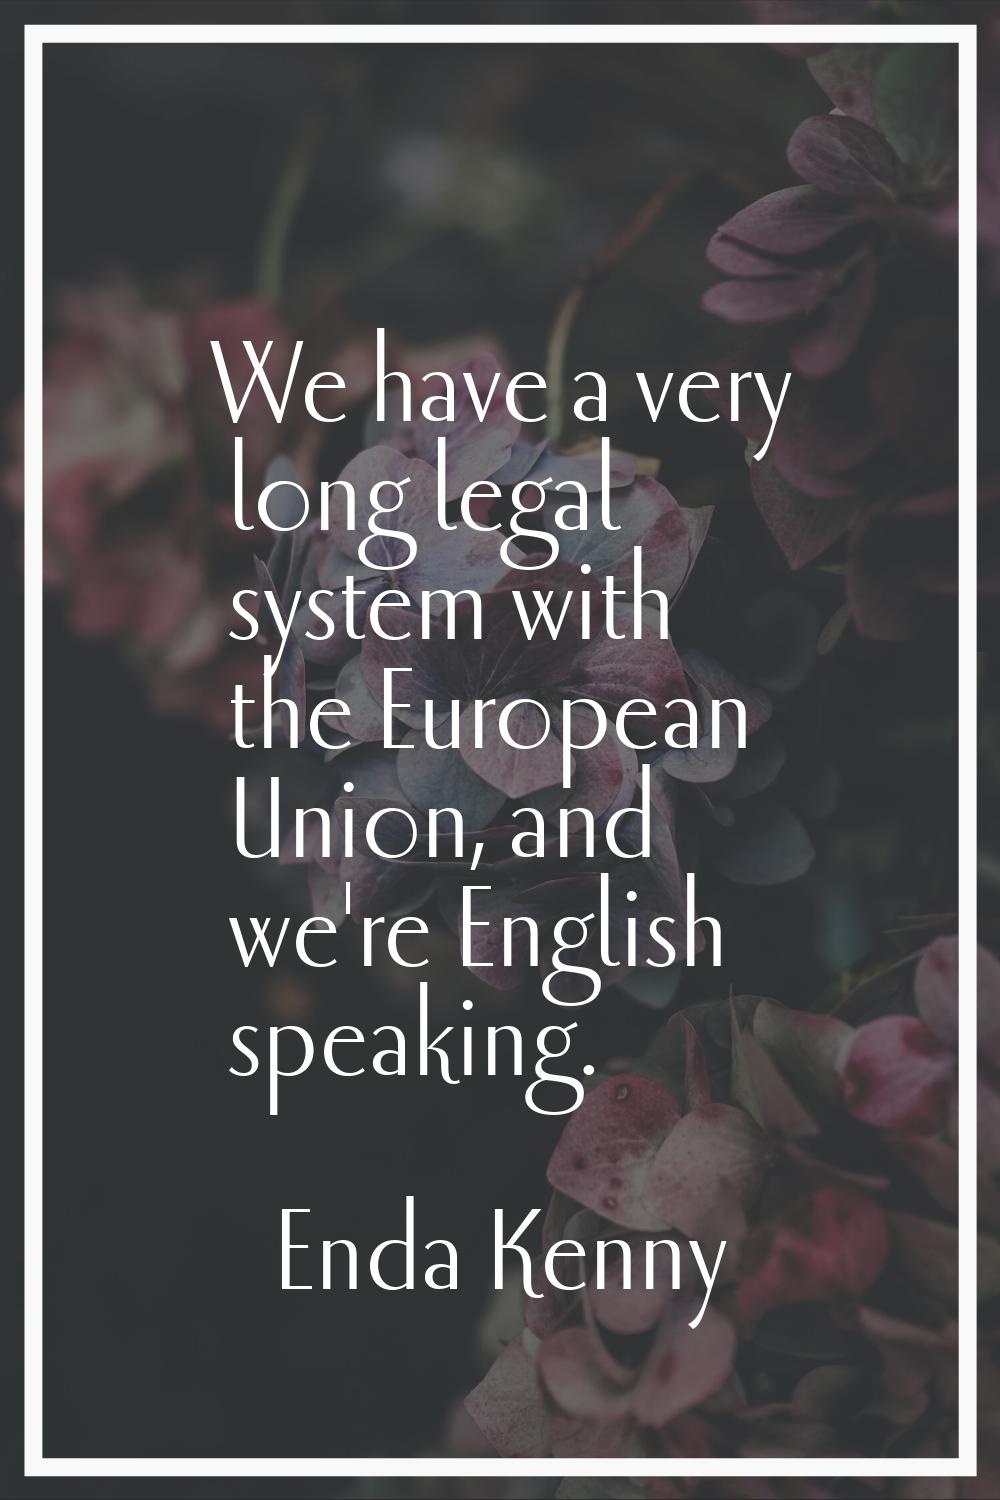 We have a very long legal system with the European Union, and we're English speaking.